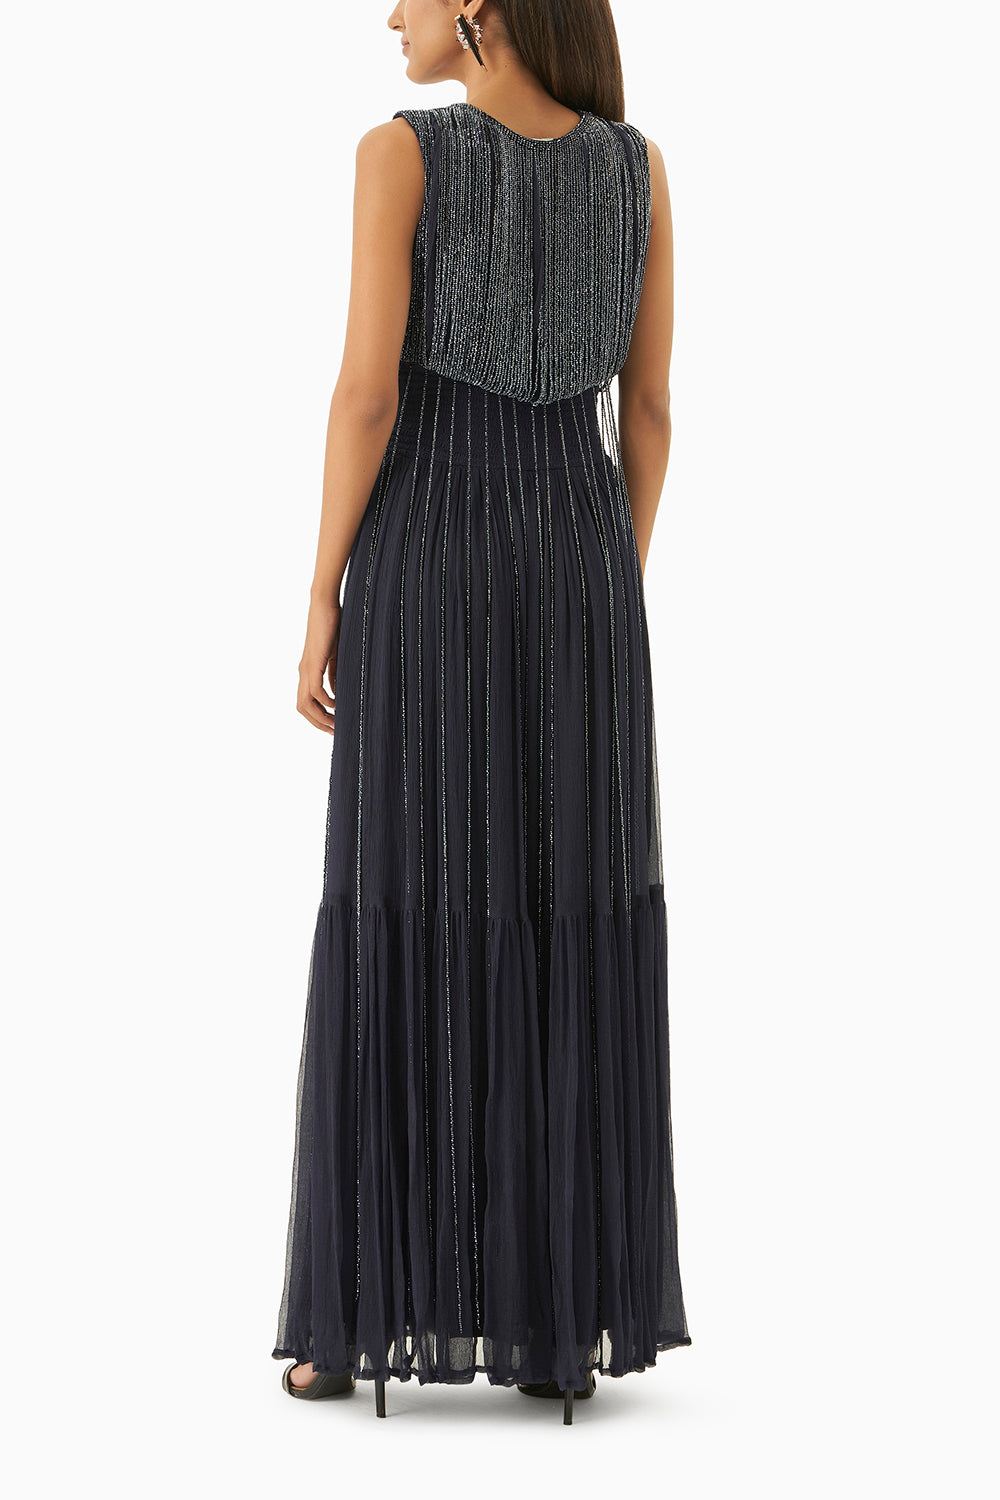 Midnight Blue Maxi Dress With Crystal Strings